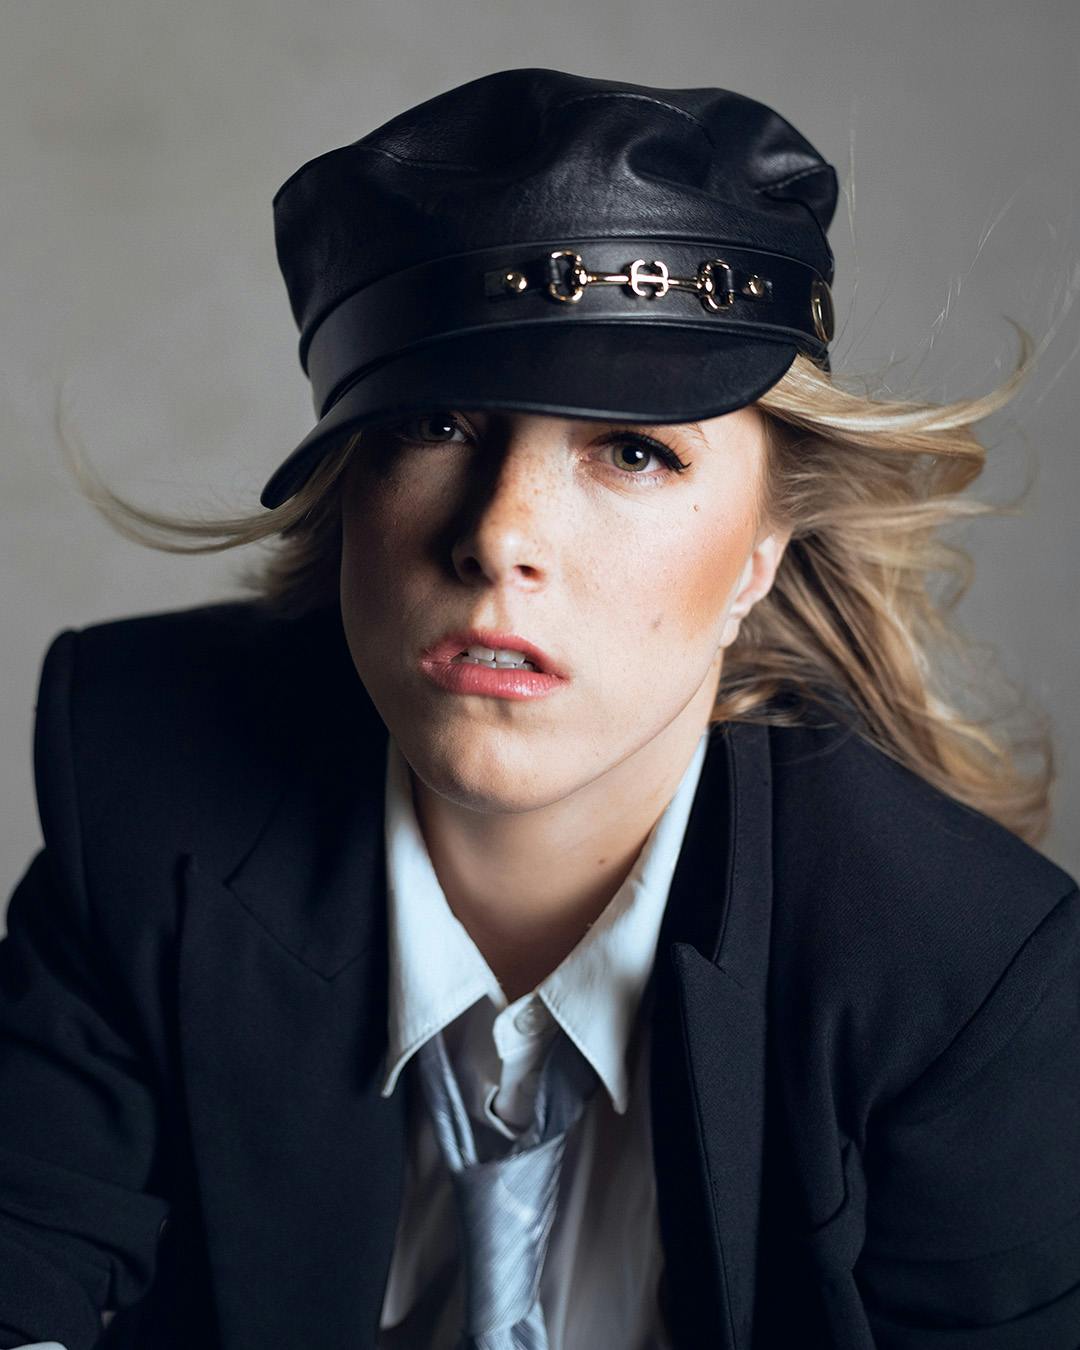 Girl wearing black hat and outfit in low-key lighting.